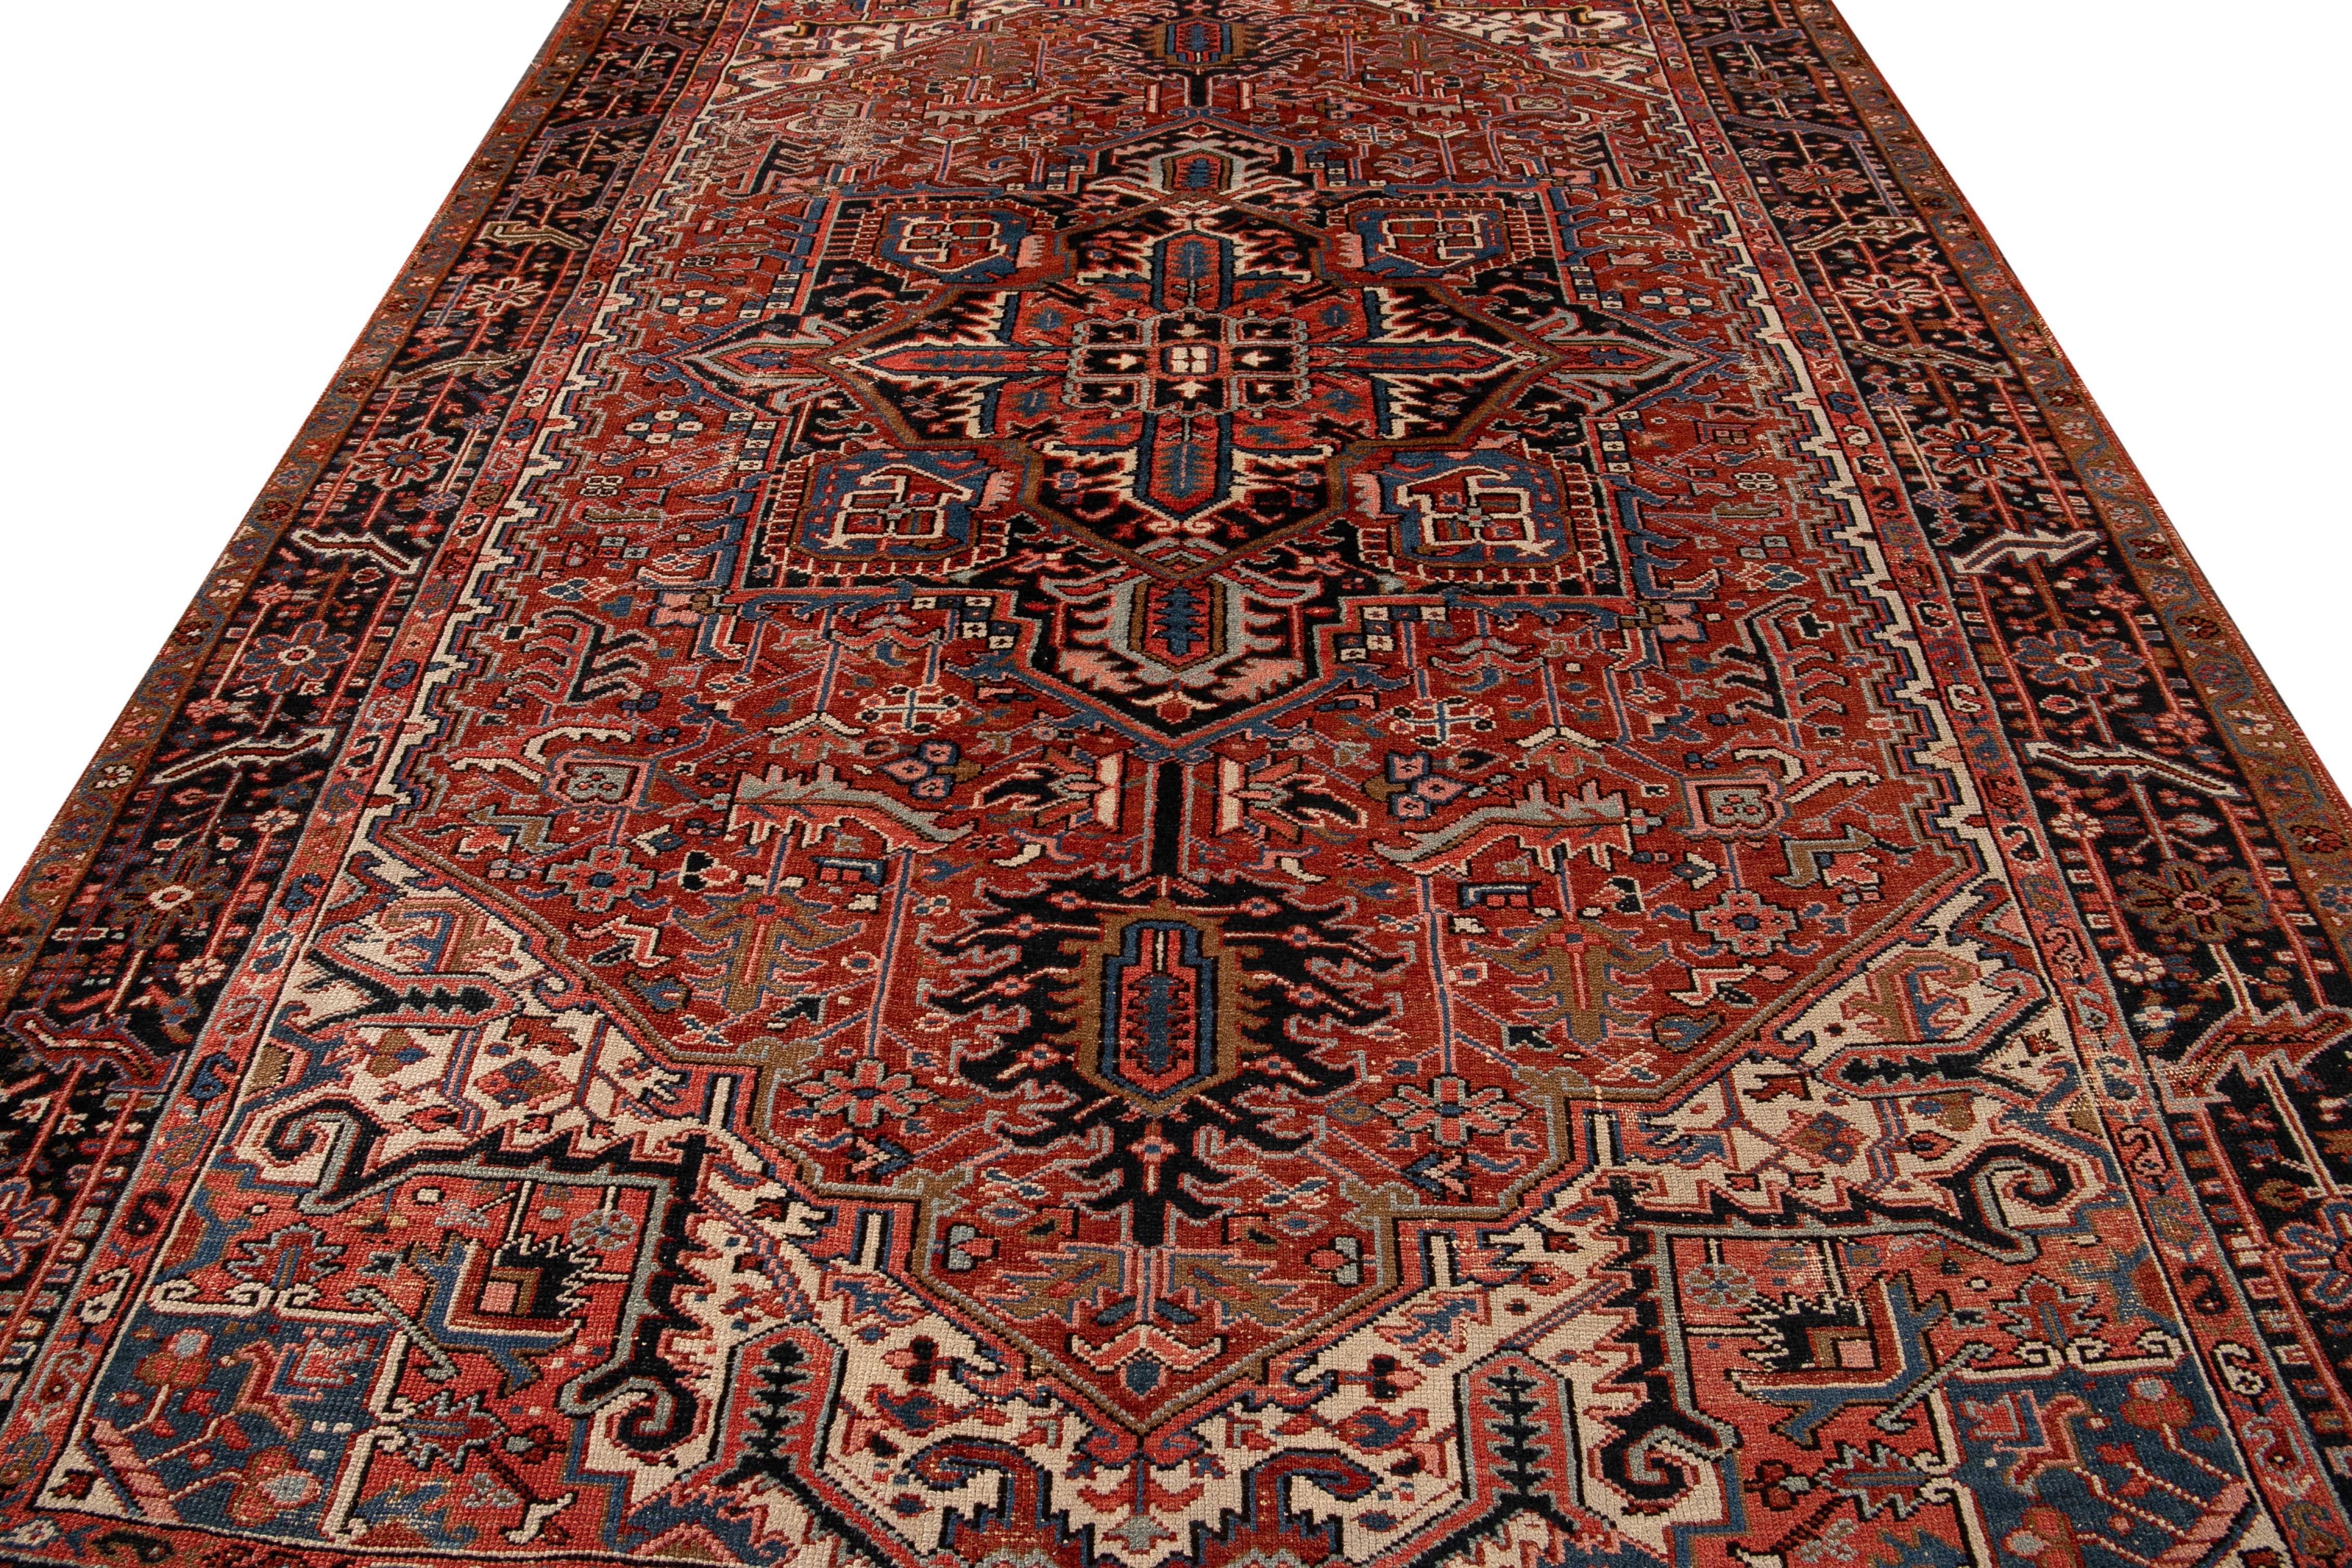 Beautiful antique Persian Heriz hand-knotted wool rug with a rust field. This Heriz rug has a navy-blue frame and multi-color accents in an all-over gorgeous geometric medallion floral design.

This rug measures: 7'11 x 11'10